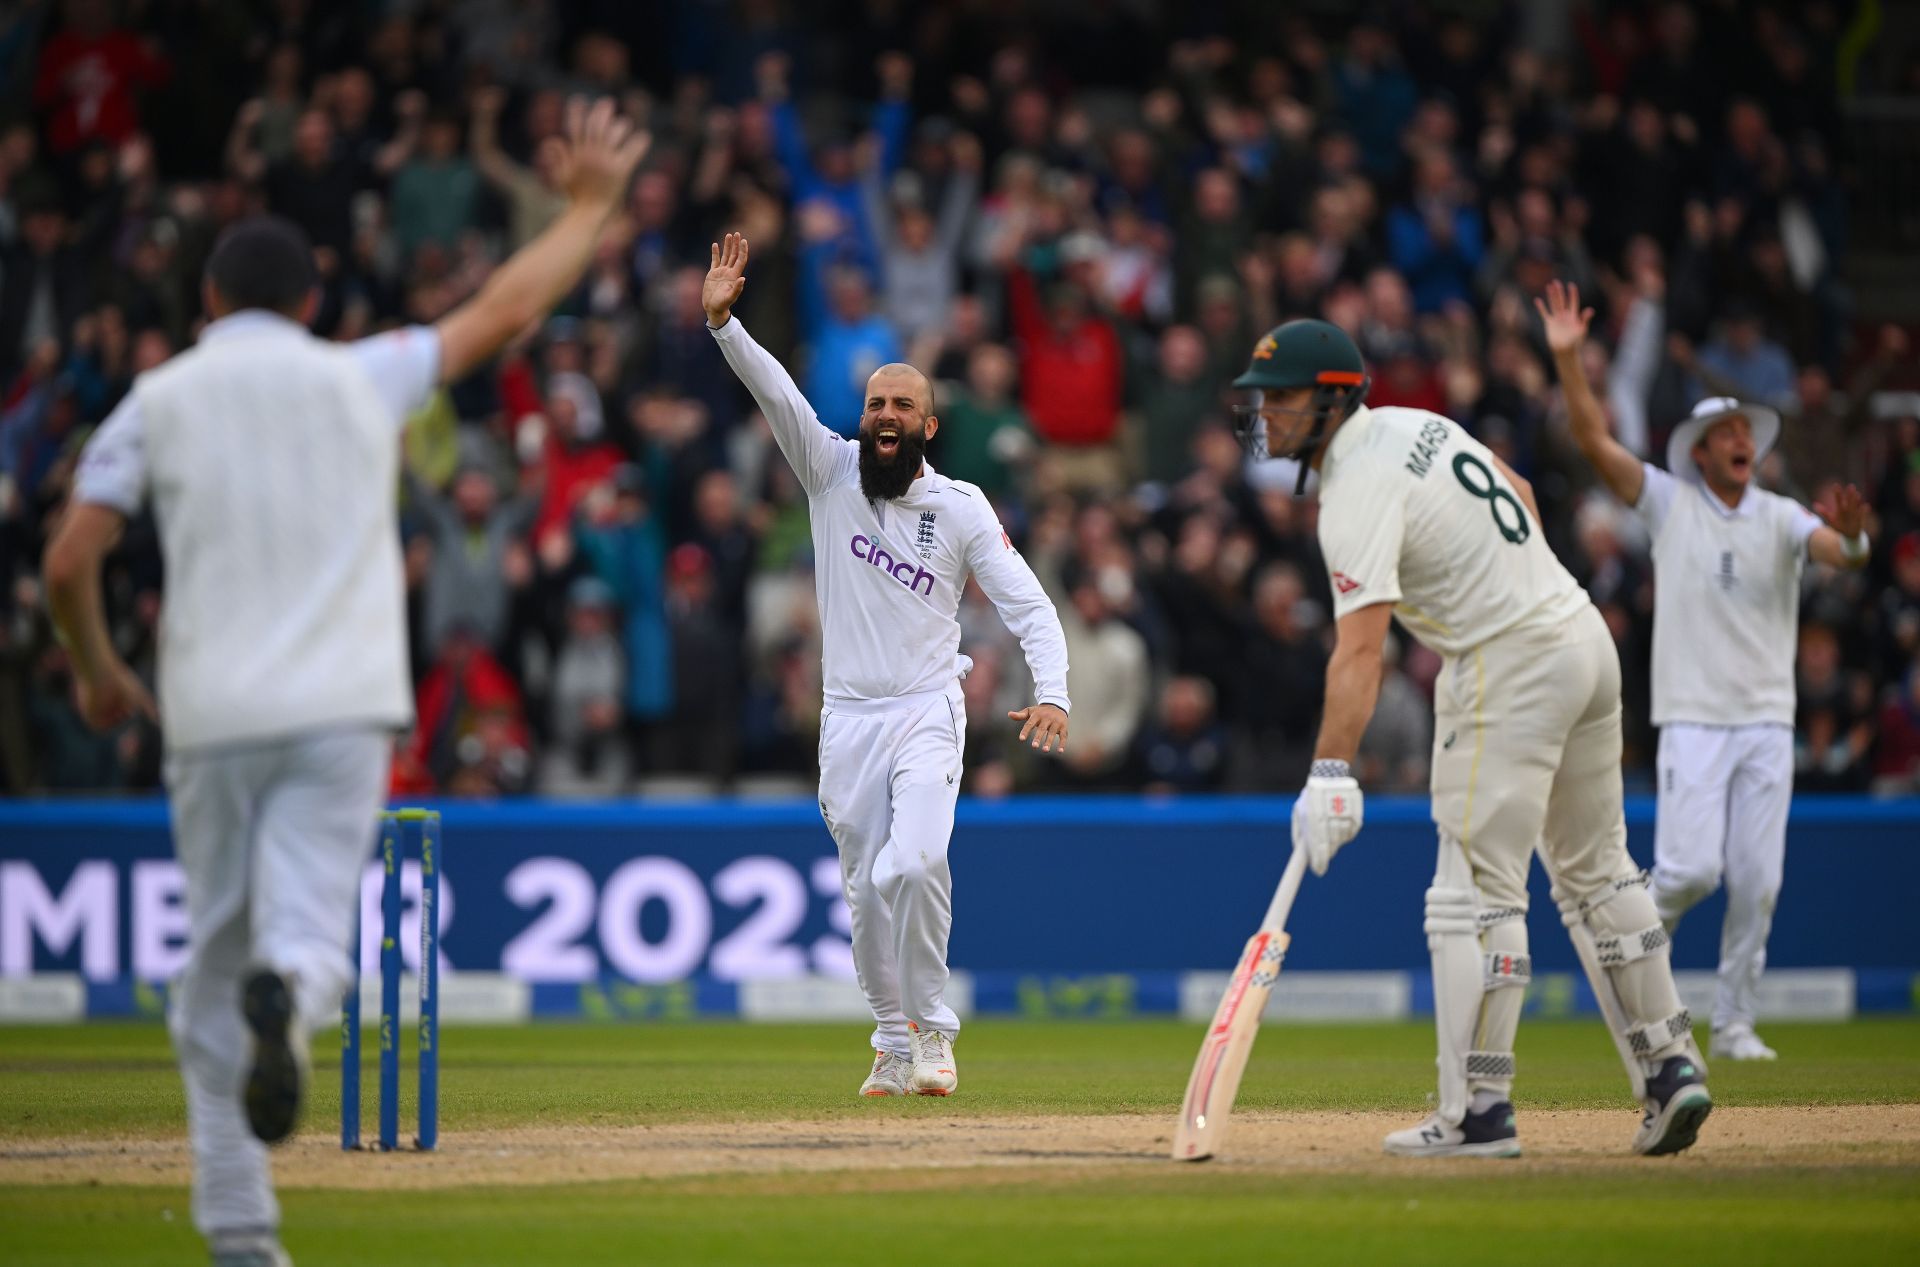 Moeen Ali will have an important role on day five of the Ashes Test